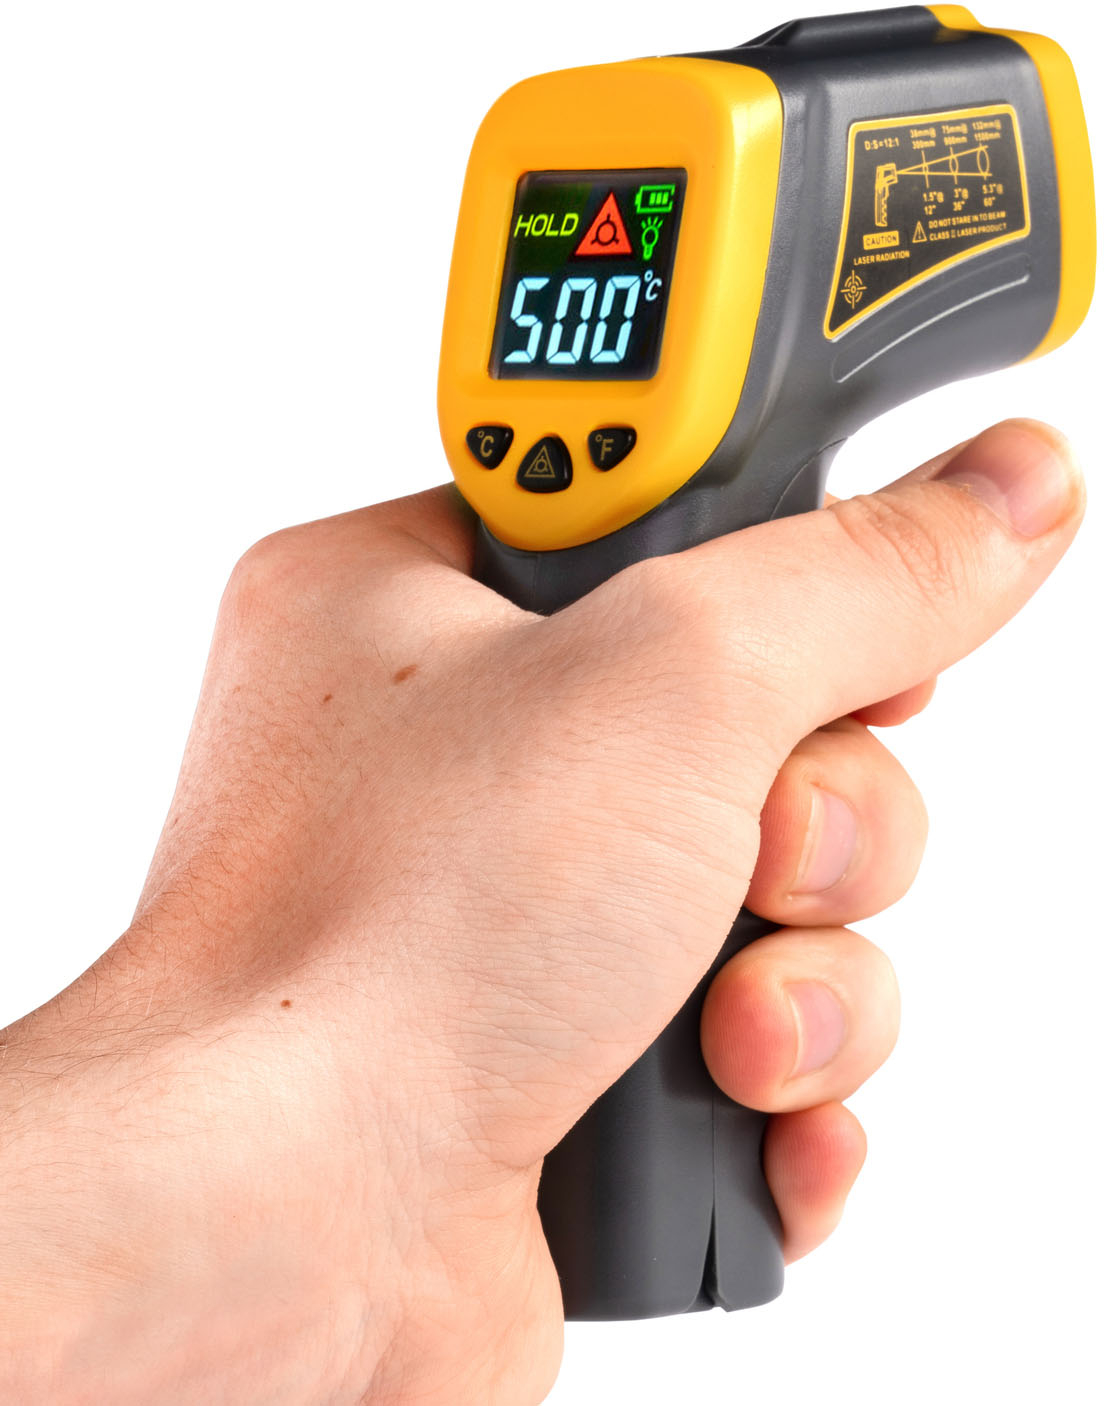 Ooni - Infrared Thermometer with Laser Pointer - Gray